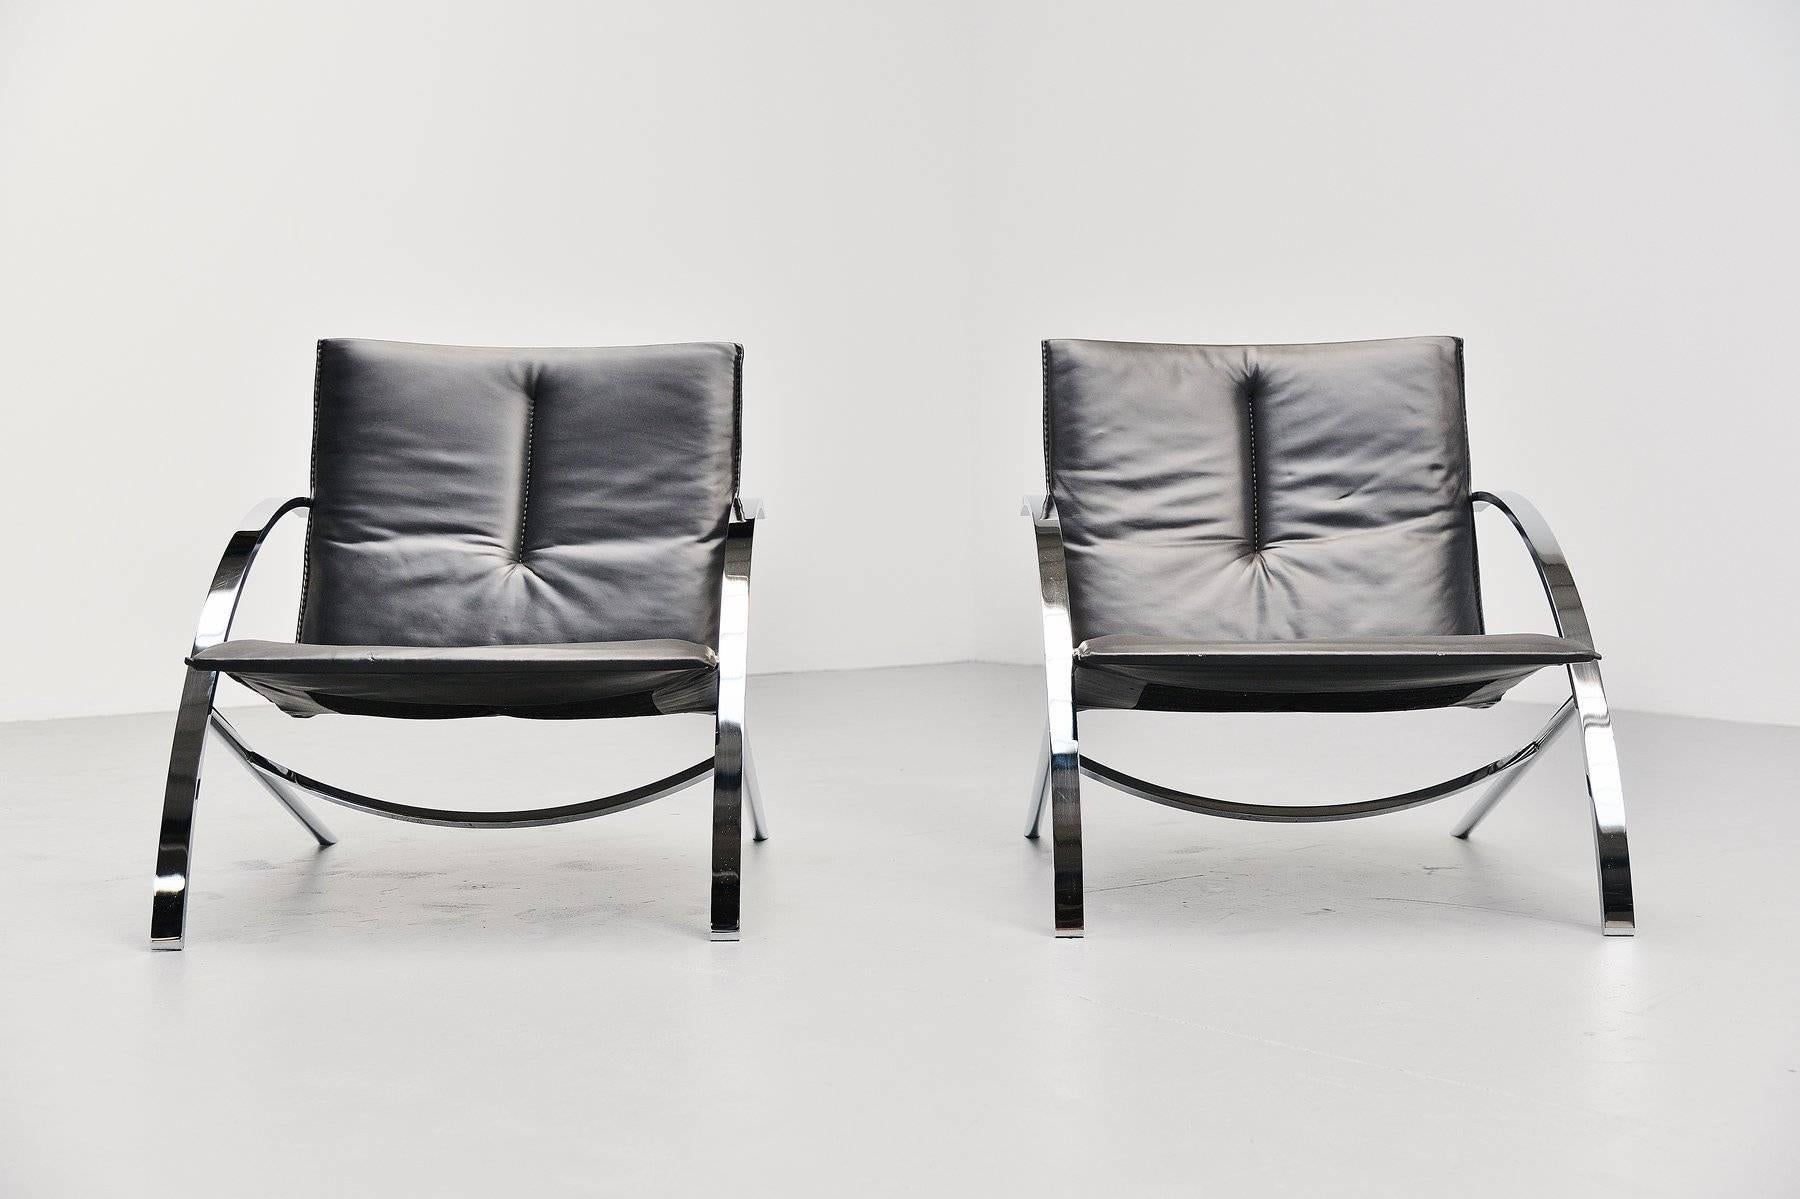 Plated Paul Tuttle Arco Lounge Chair Pair for Strassle, 1976